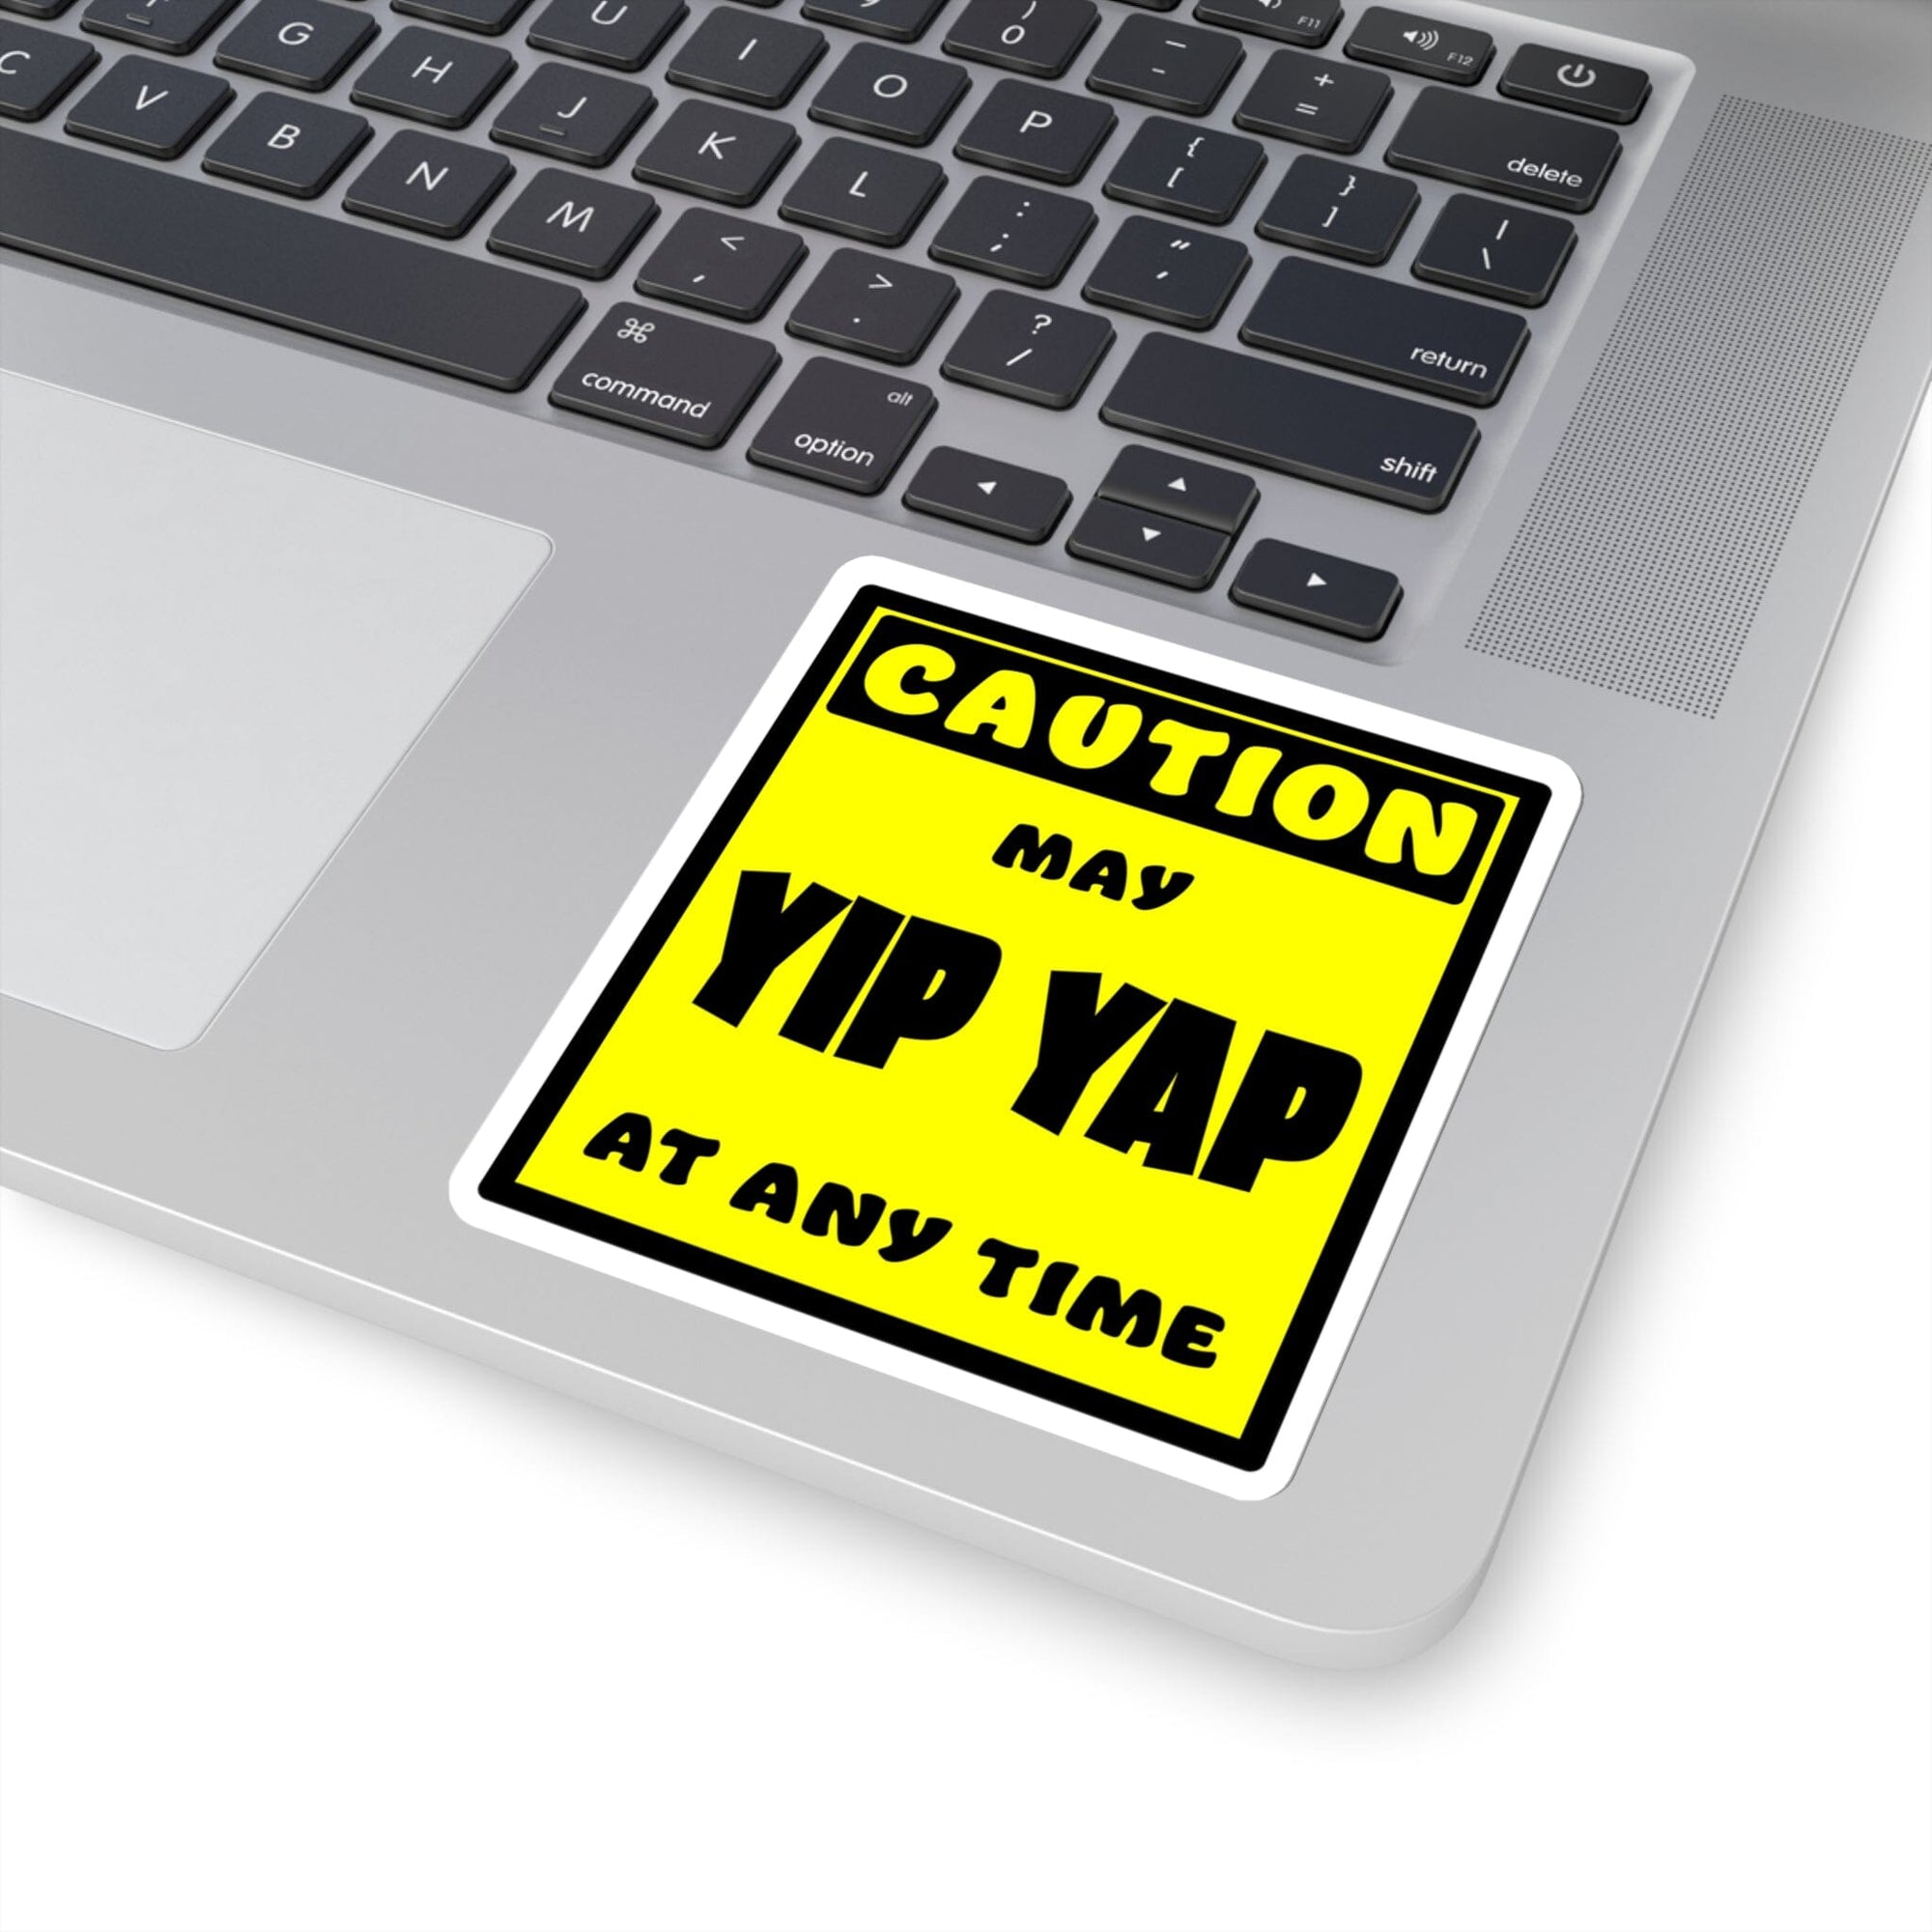 CAUTION! May Yip Yap at any time! - Sticker Sticker AFLT-Whootorca 